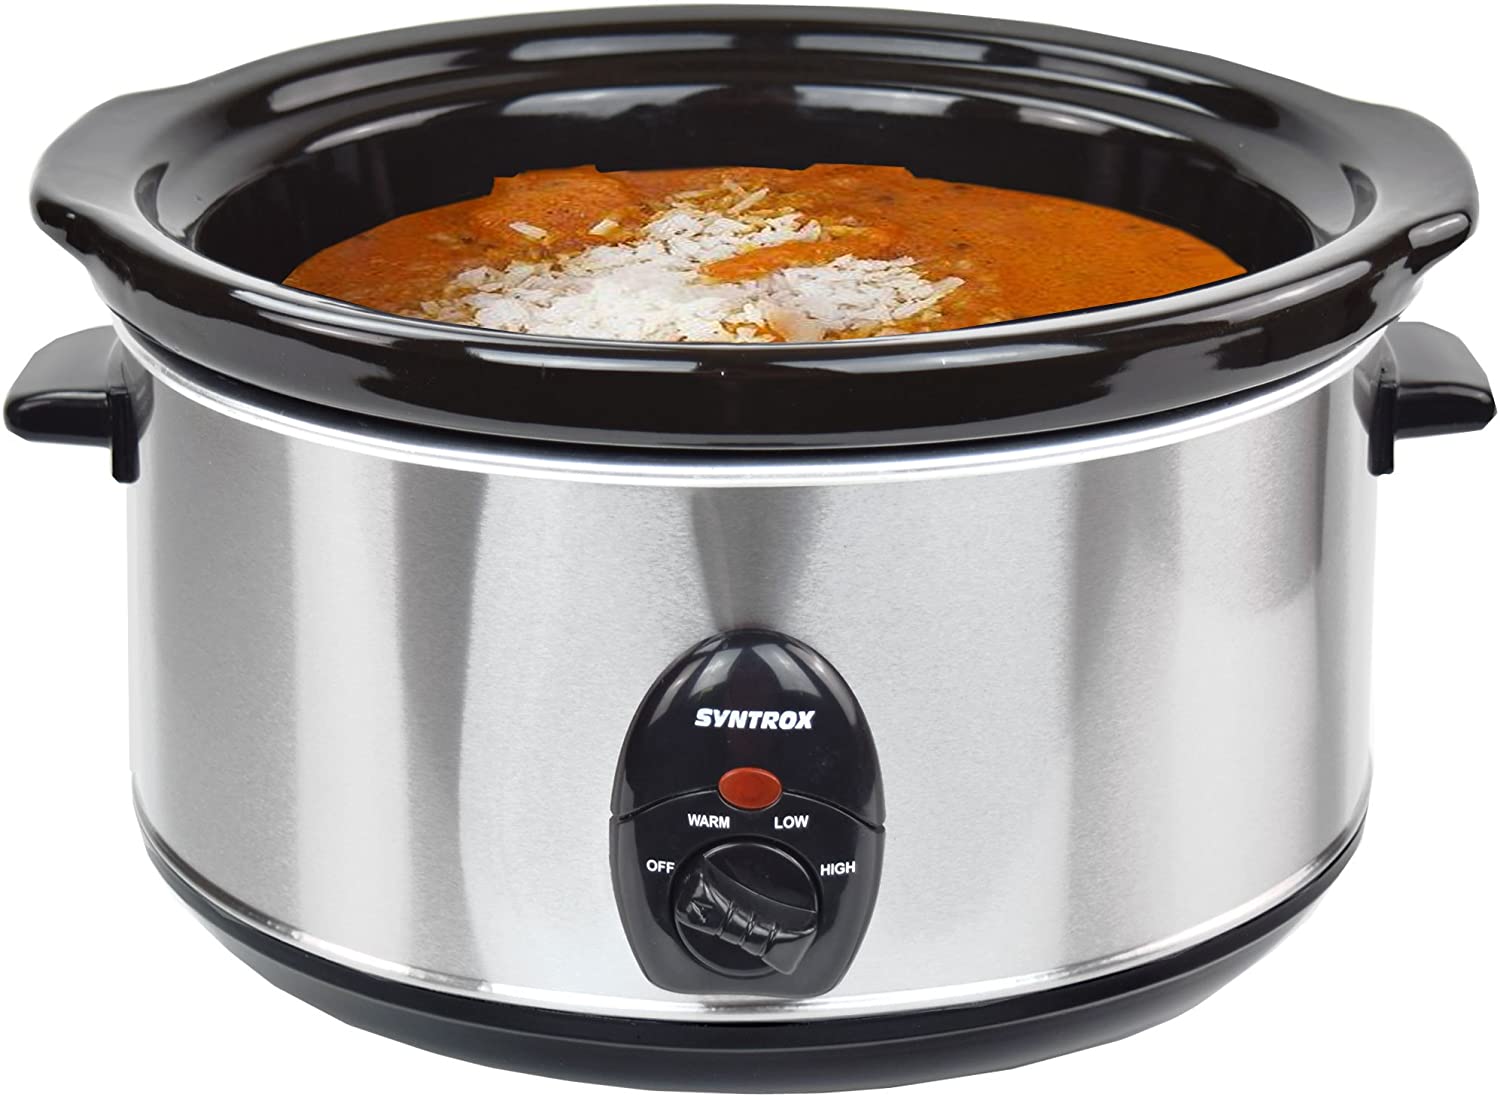 Syntrox Germany 4.5 litre stainless steel slow cooker with warming function, safety glass and removable ceramic bowl, slow cooker